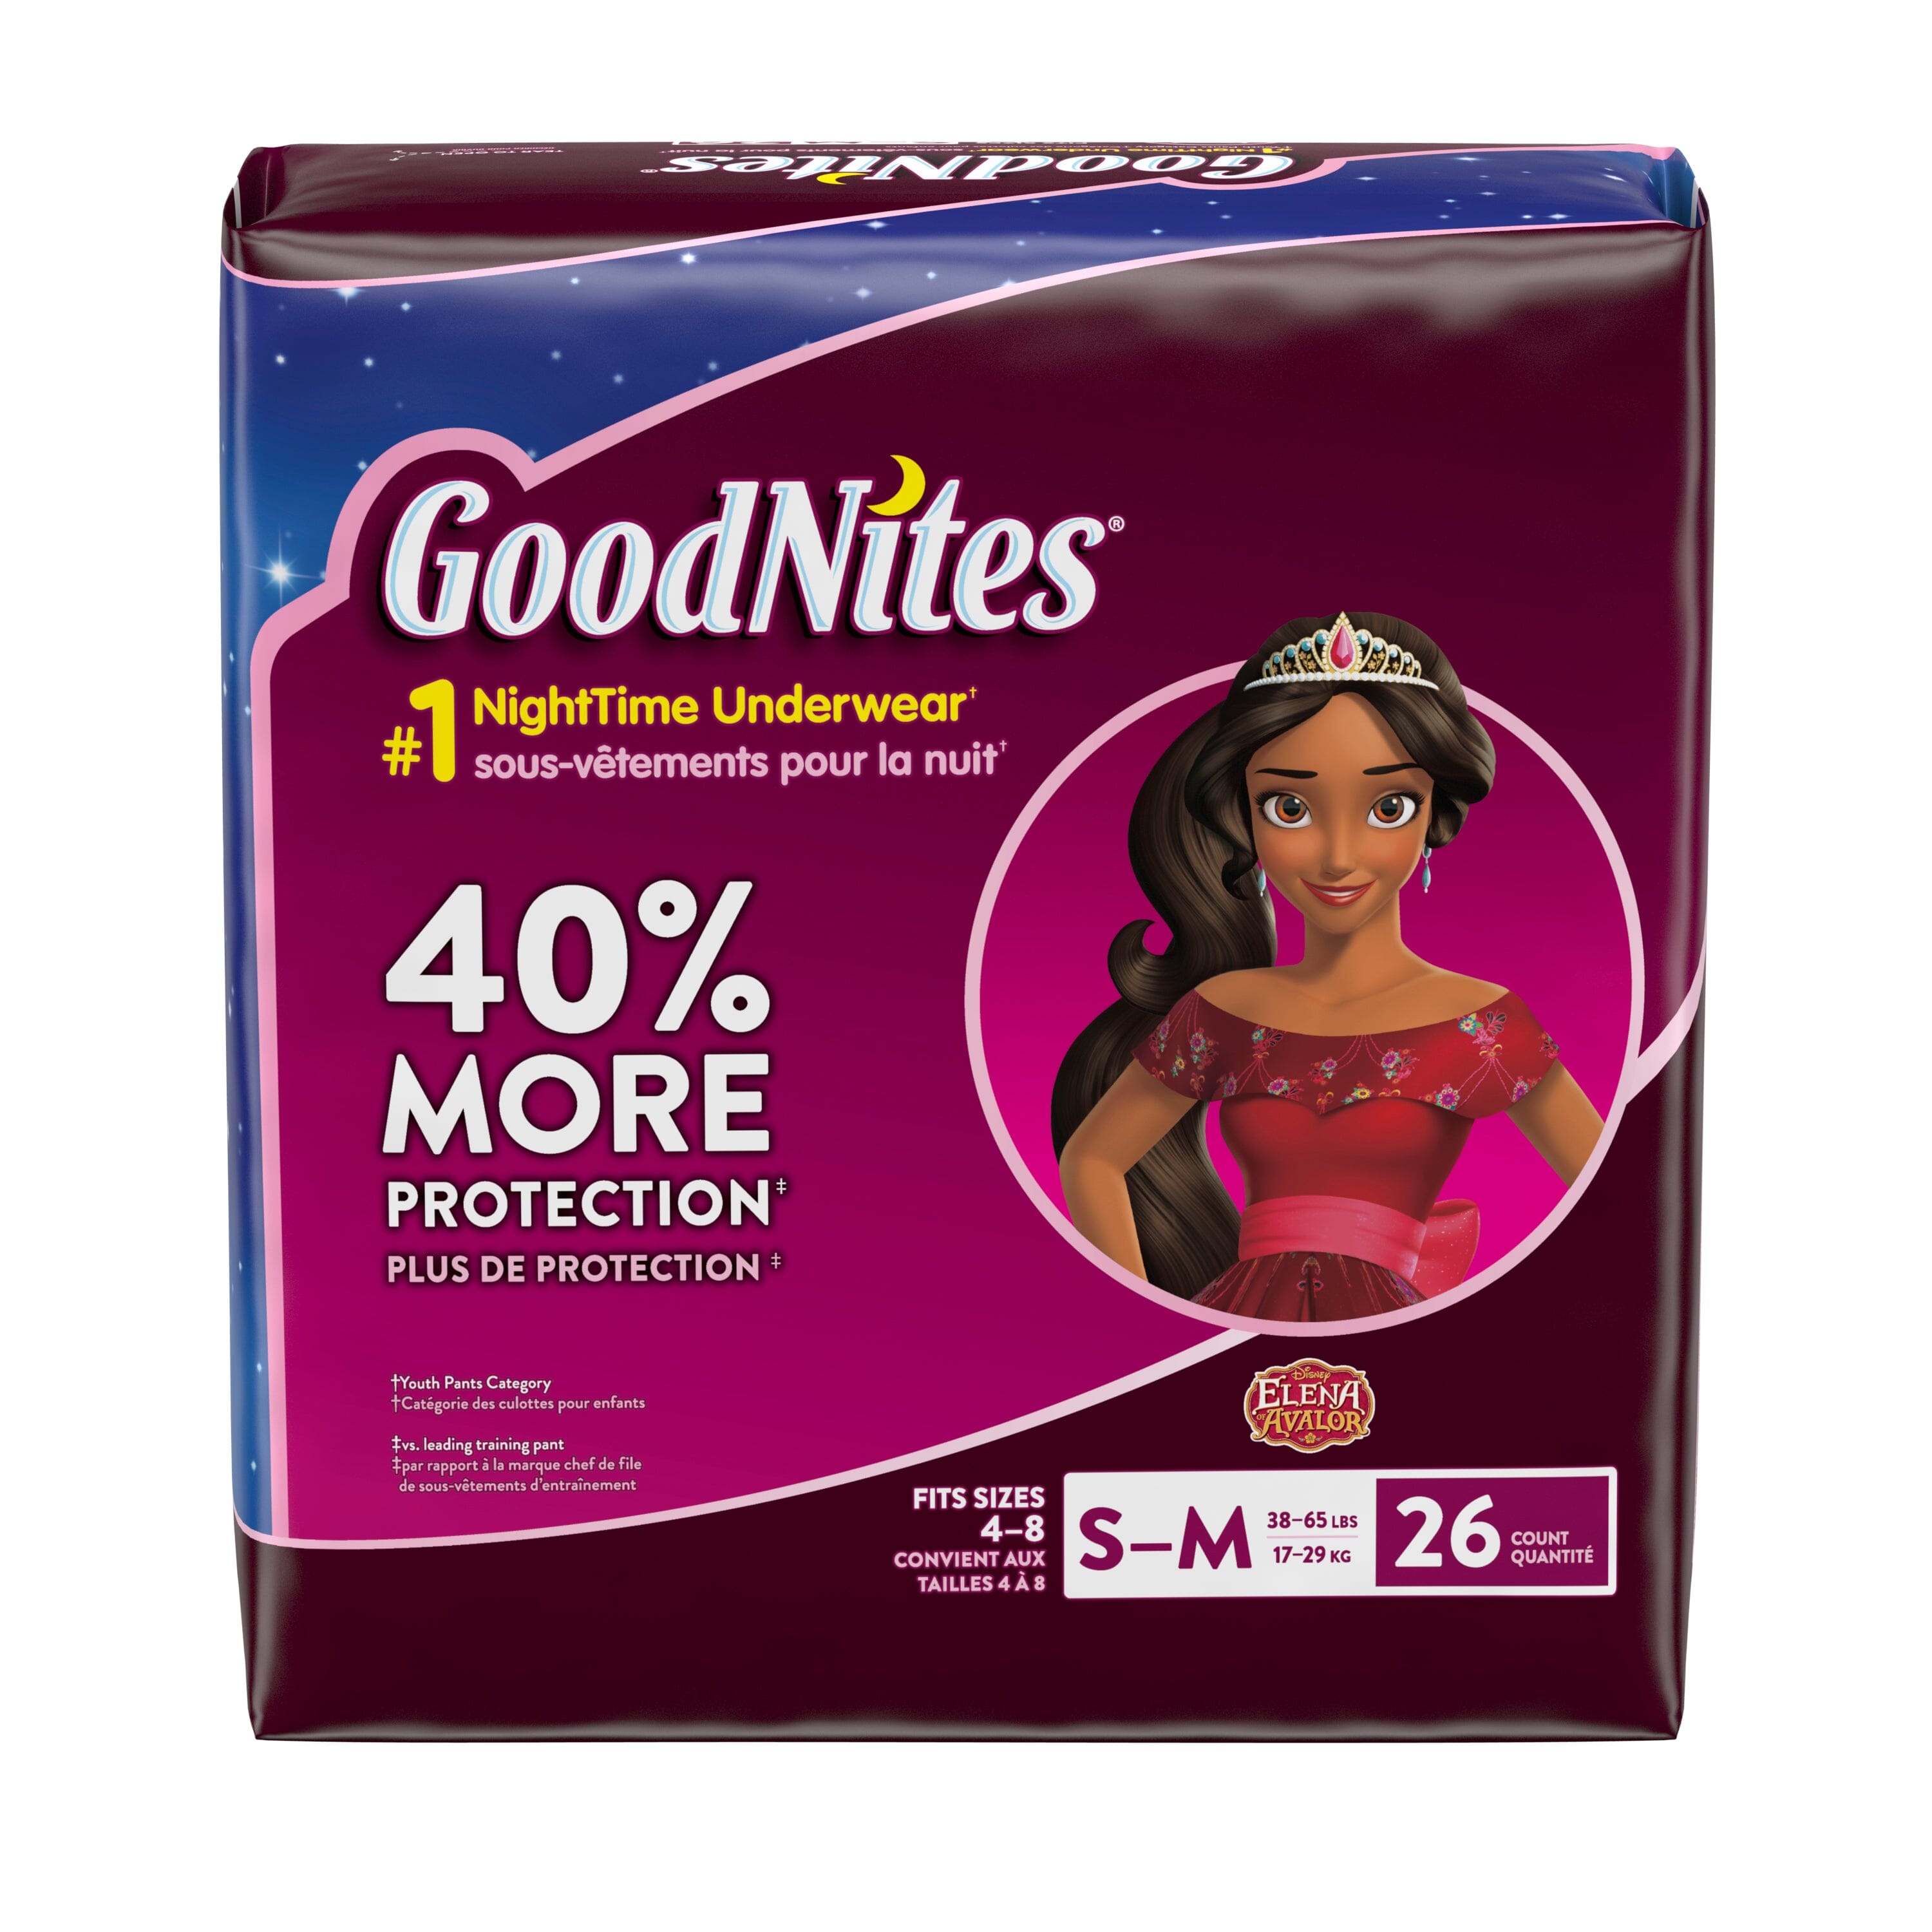 GoodNites Bedtime Bedwetting Underwear for Girls, L-XL, 20 Ct. (Packaging  May Vary) - MANUFACTURER DISCONTINUED